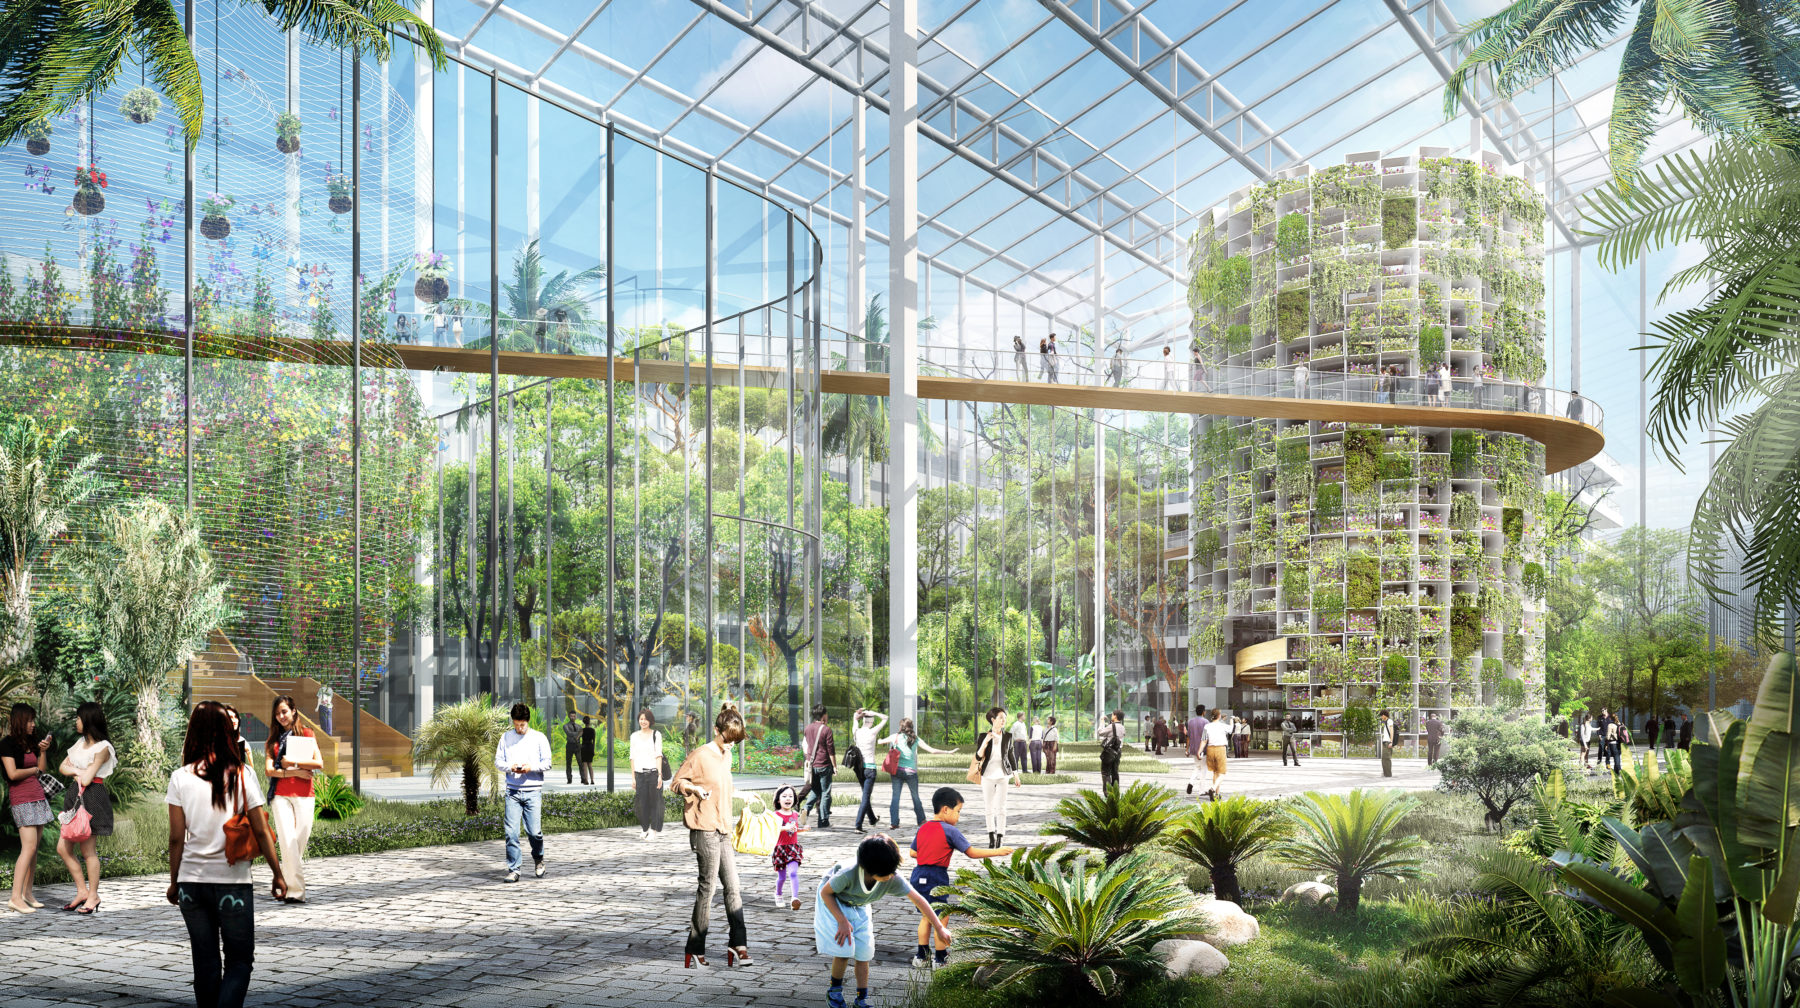 Rendering of the Sunqiao Urban Agriculture District